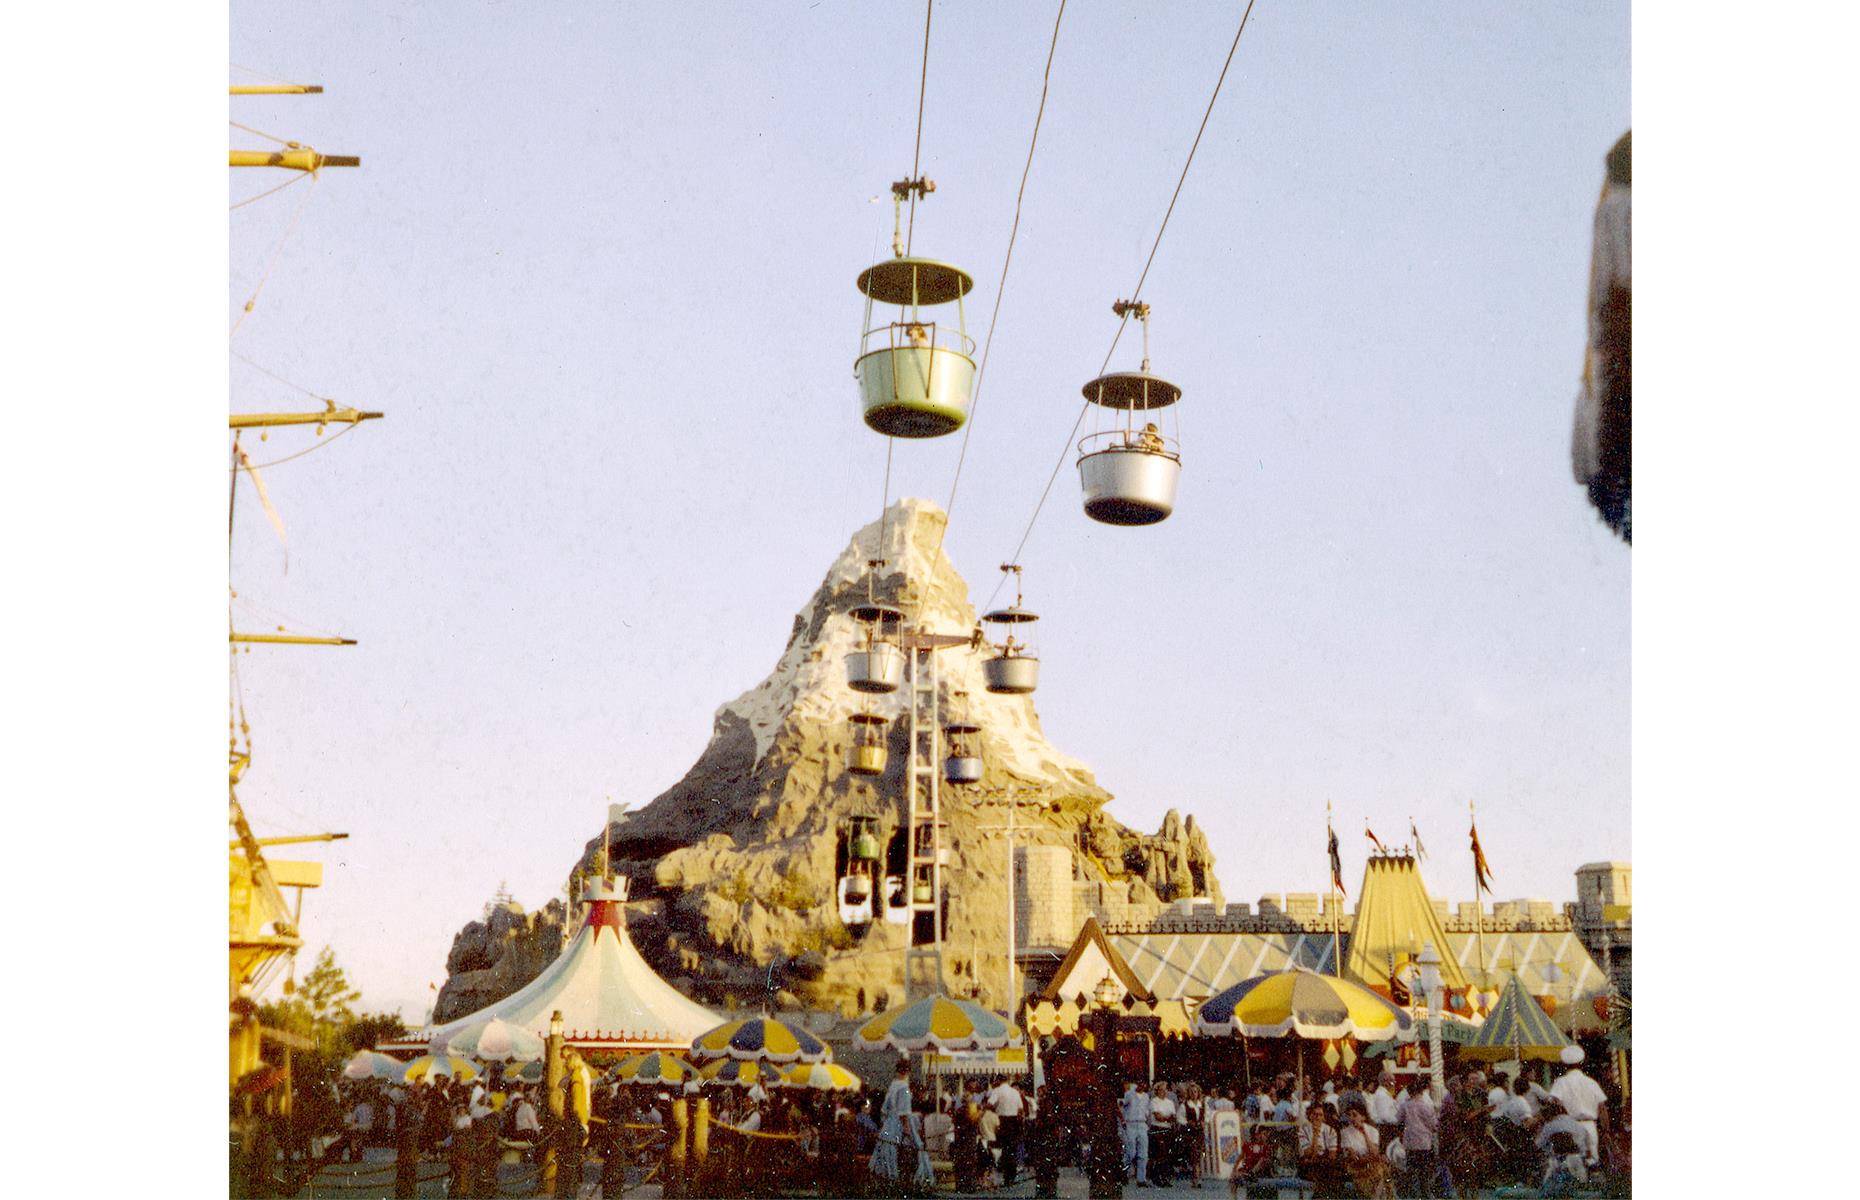 Eventually closed in 1996, another early Disneyland attraction was the Skyway, a kind of gondola-lift ride that whisked guests between Tomorrowland and Fantasyland. From these lofty heights, visitors had incredible views of the lands down below and of Matterhorn, a model of the imposing Alpine mountain at the Swiss-Italian border.